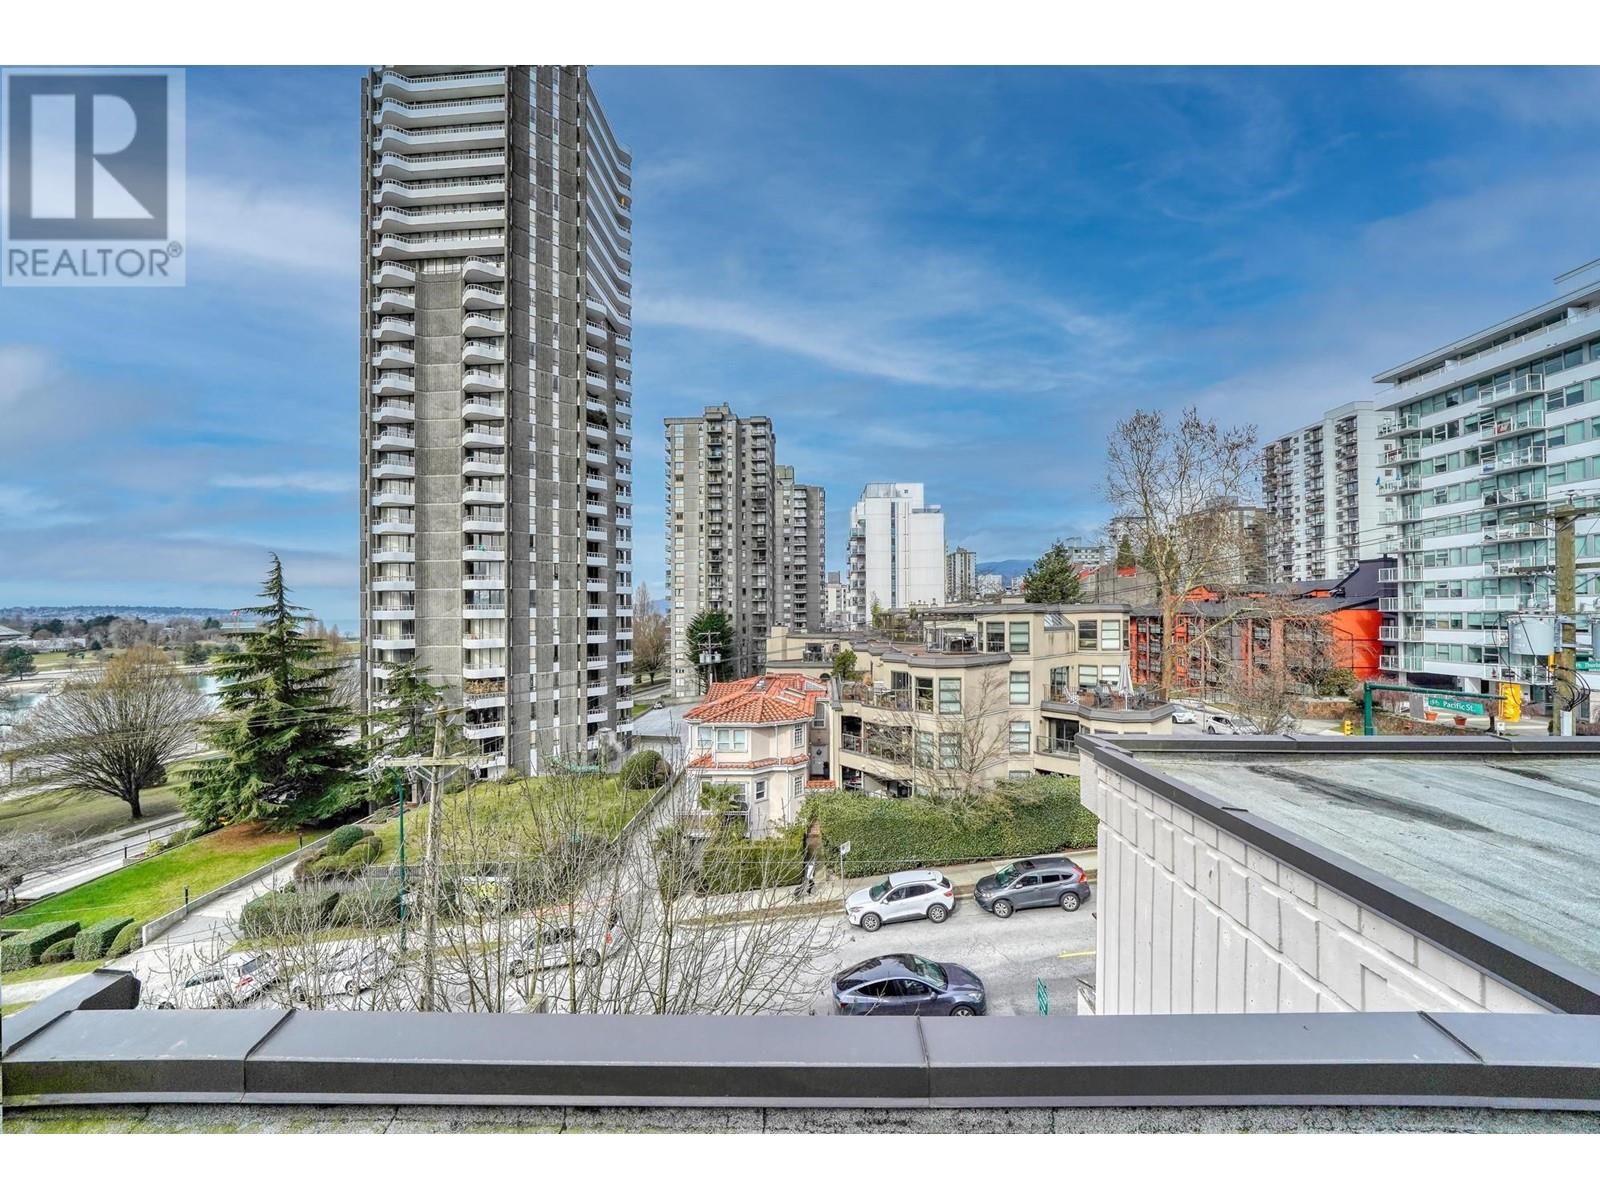 Listing Picture 25 of 27 : 302 1080 PACIFIC STREET, Vancouver / 溫哥華 - 魯藝地產 Yvonne Lu Group - MLS Medallion Club Member